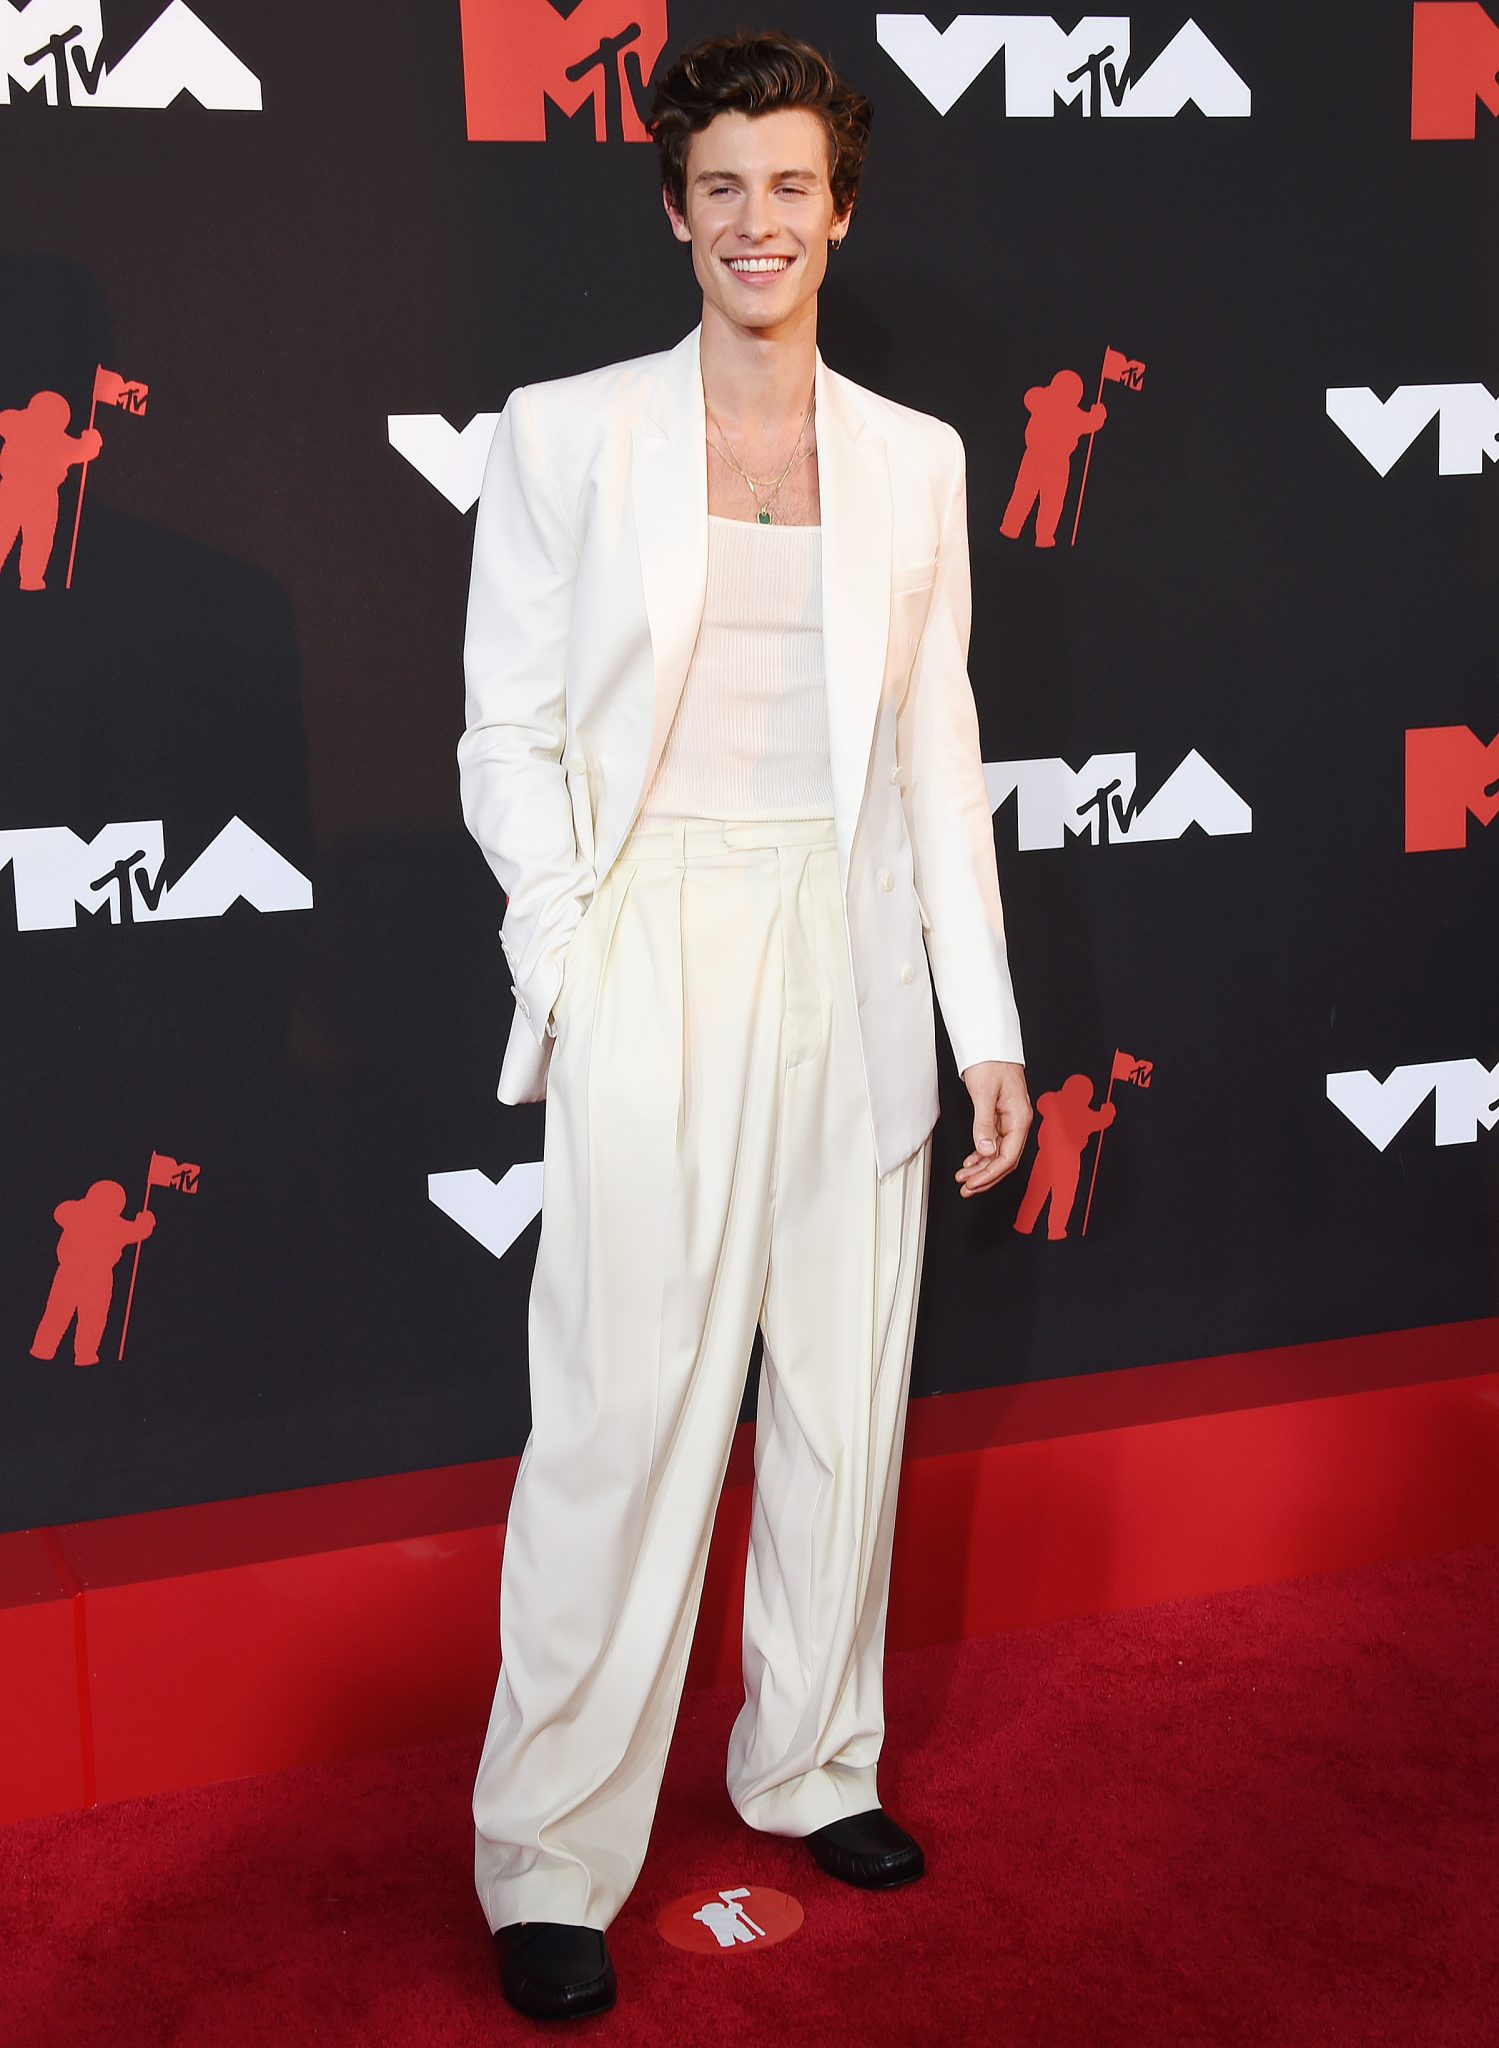 The Most Iconic Looks From Last Night's MTV Video Music Awards SPIN1038